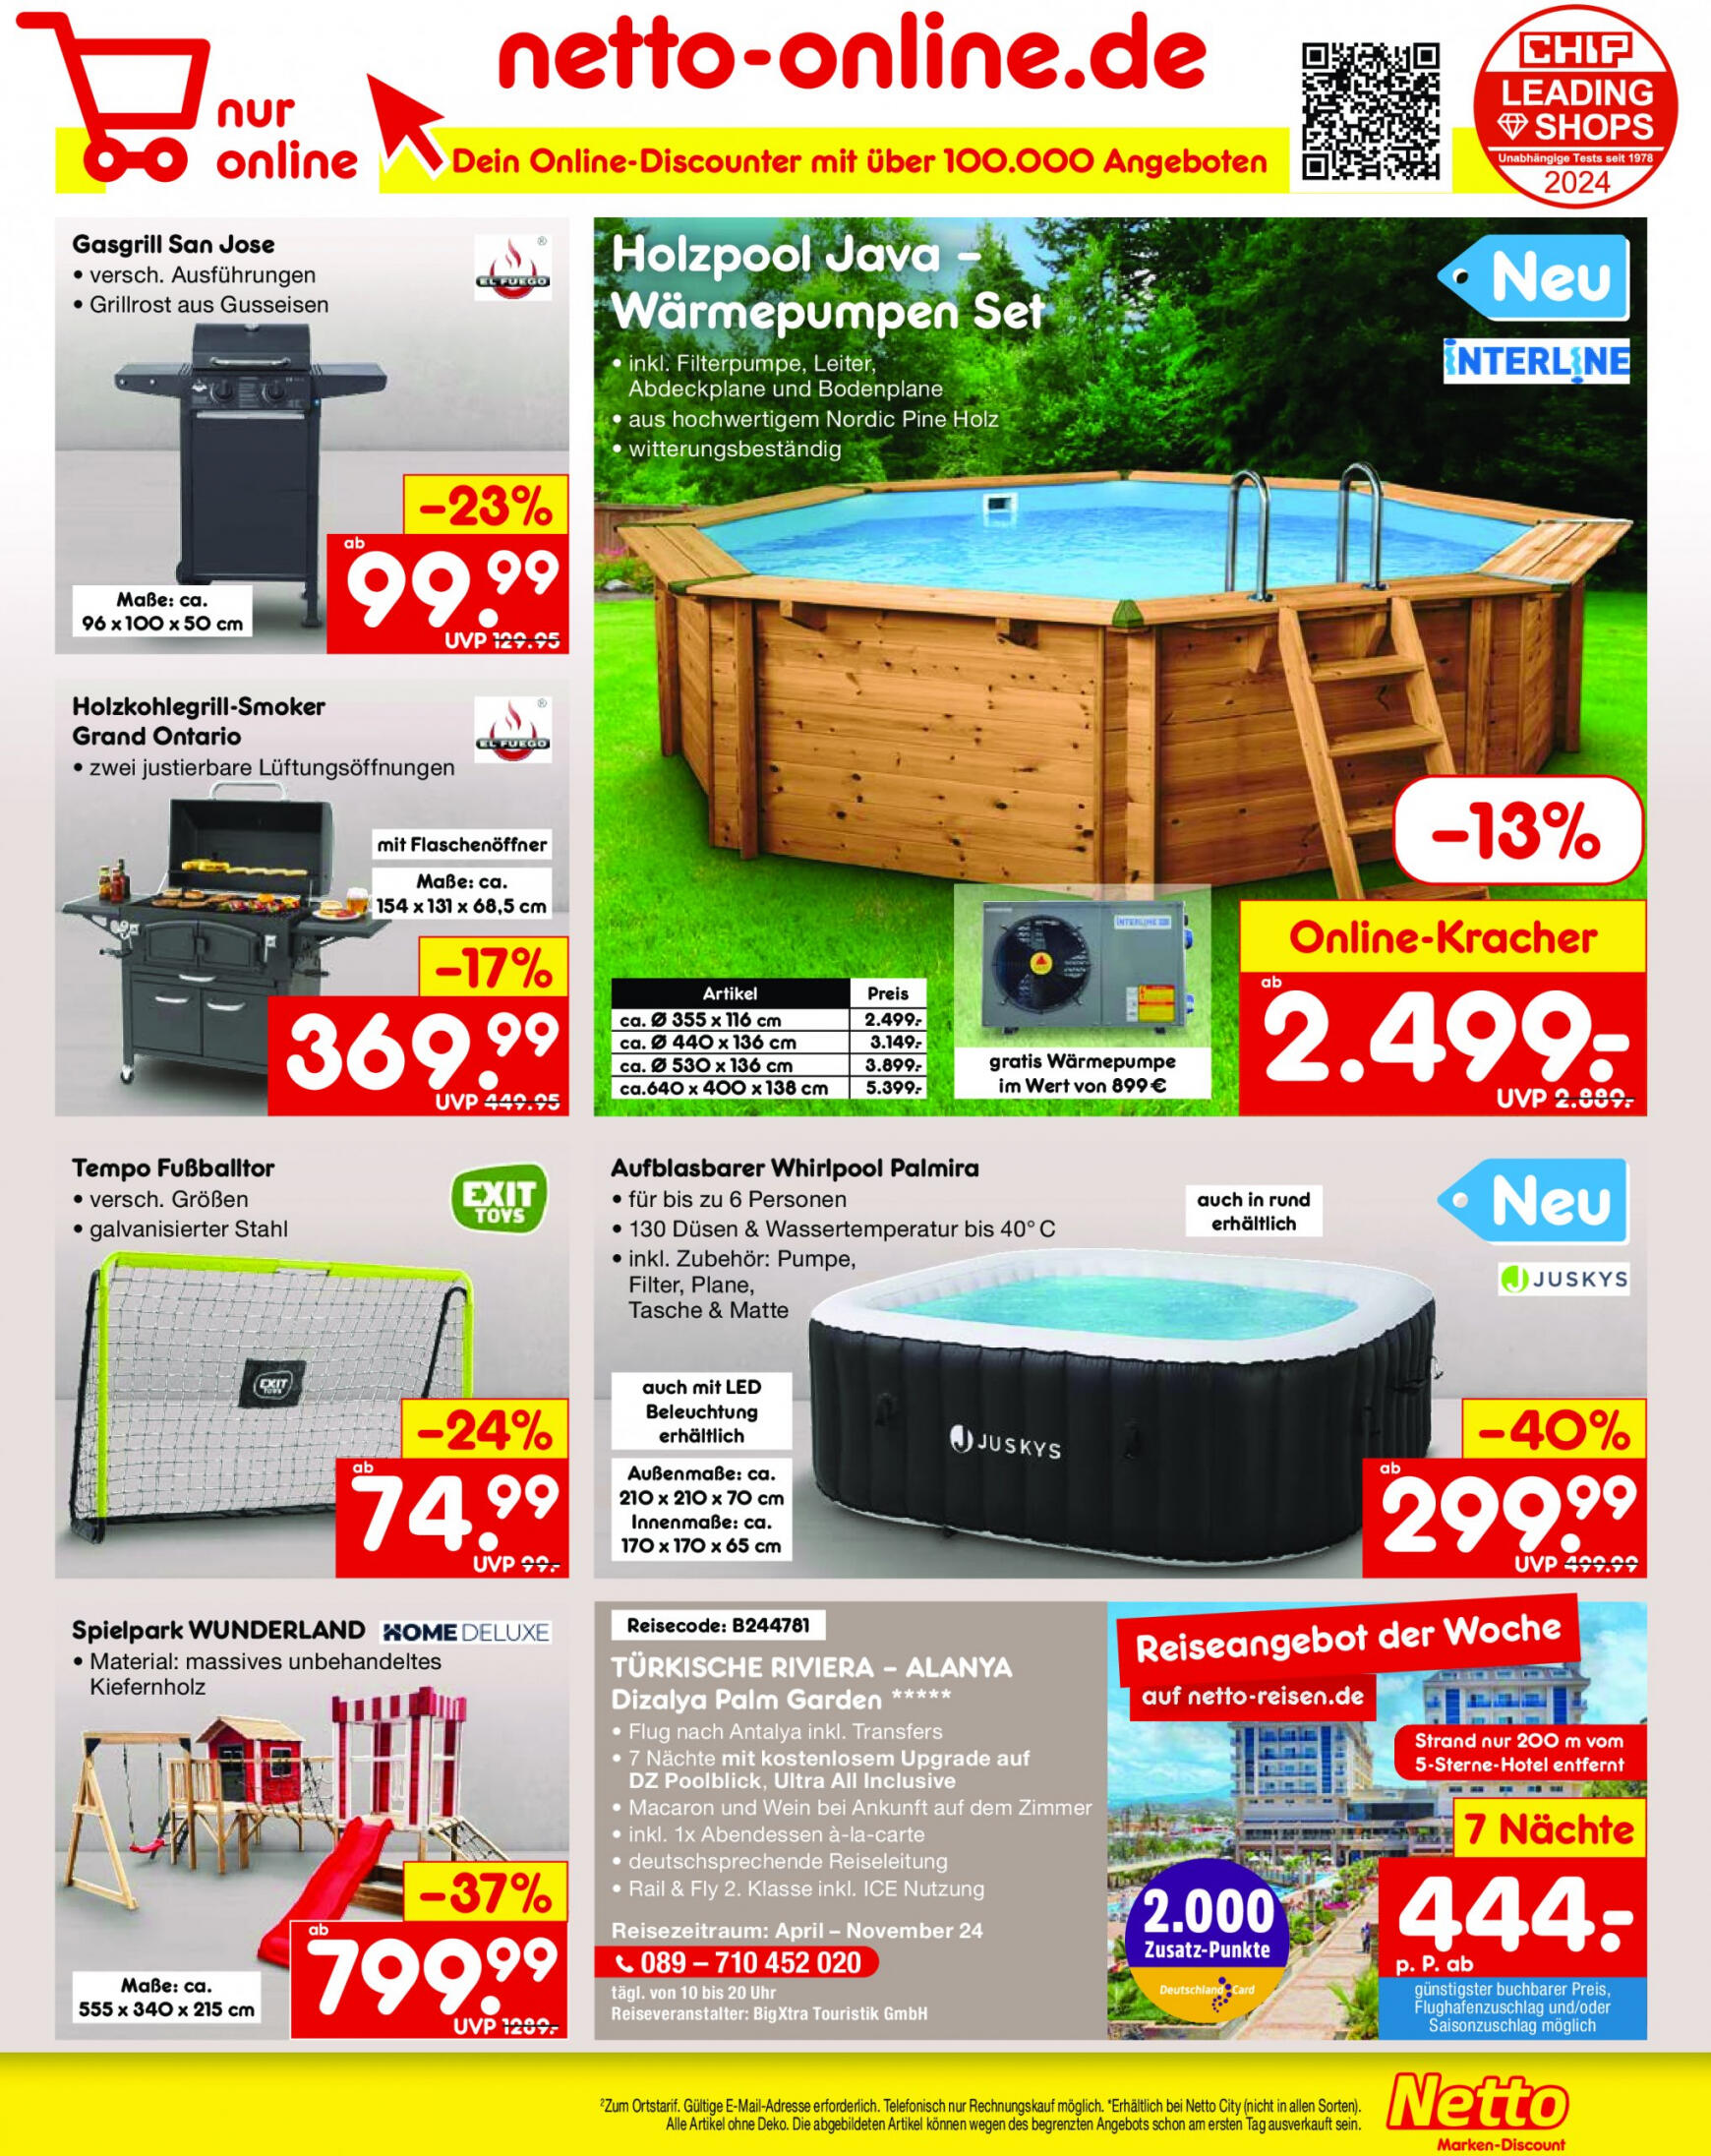 netto - Flyer Netto aktuell 22.04. - 27.04. - page: 35